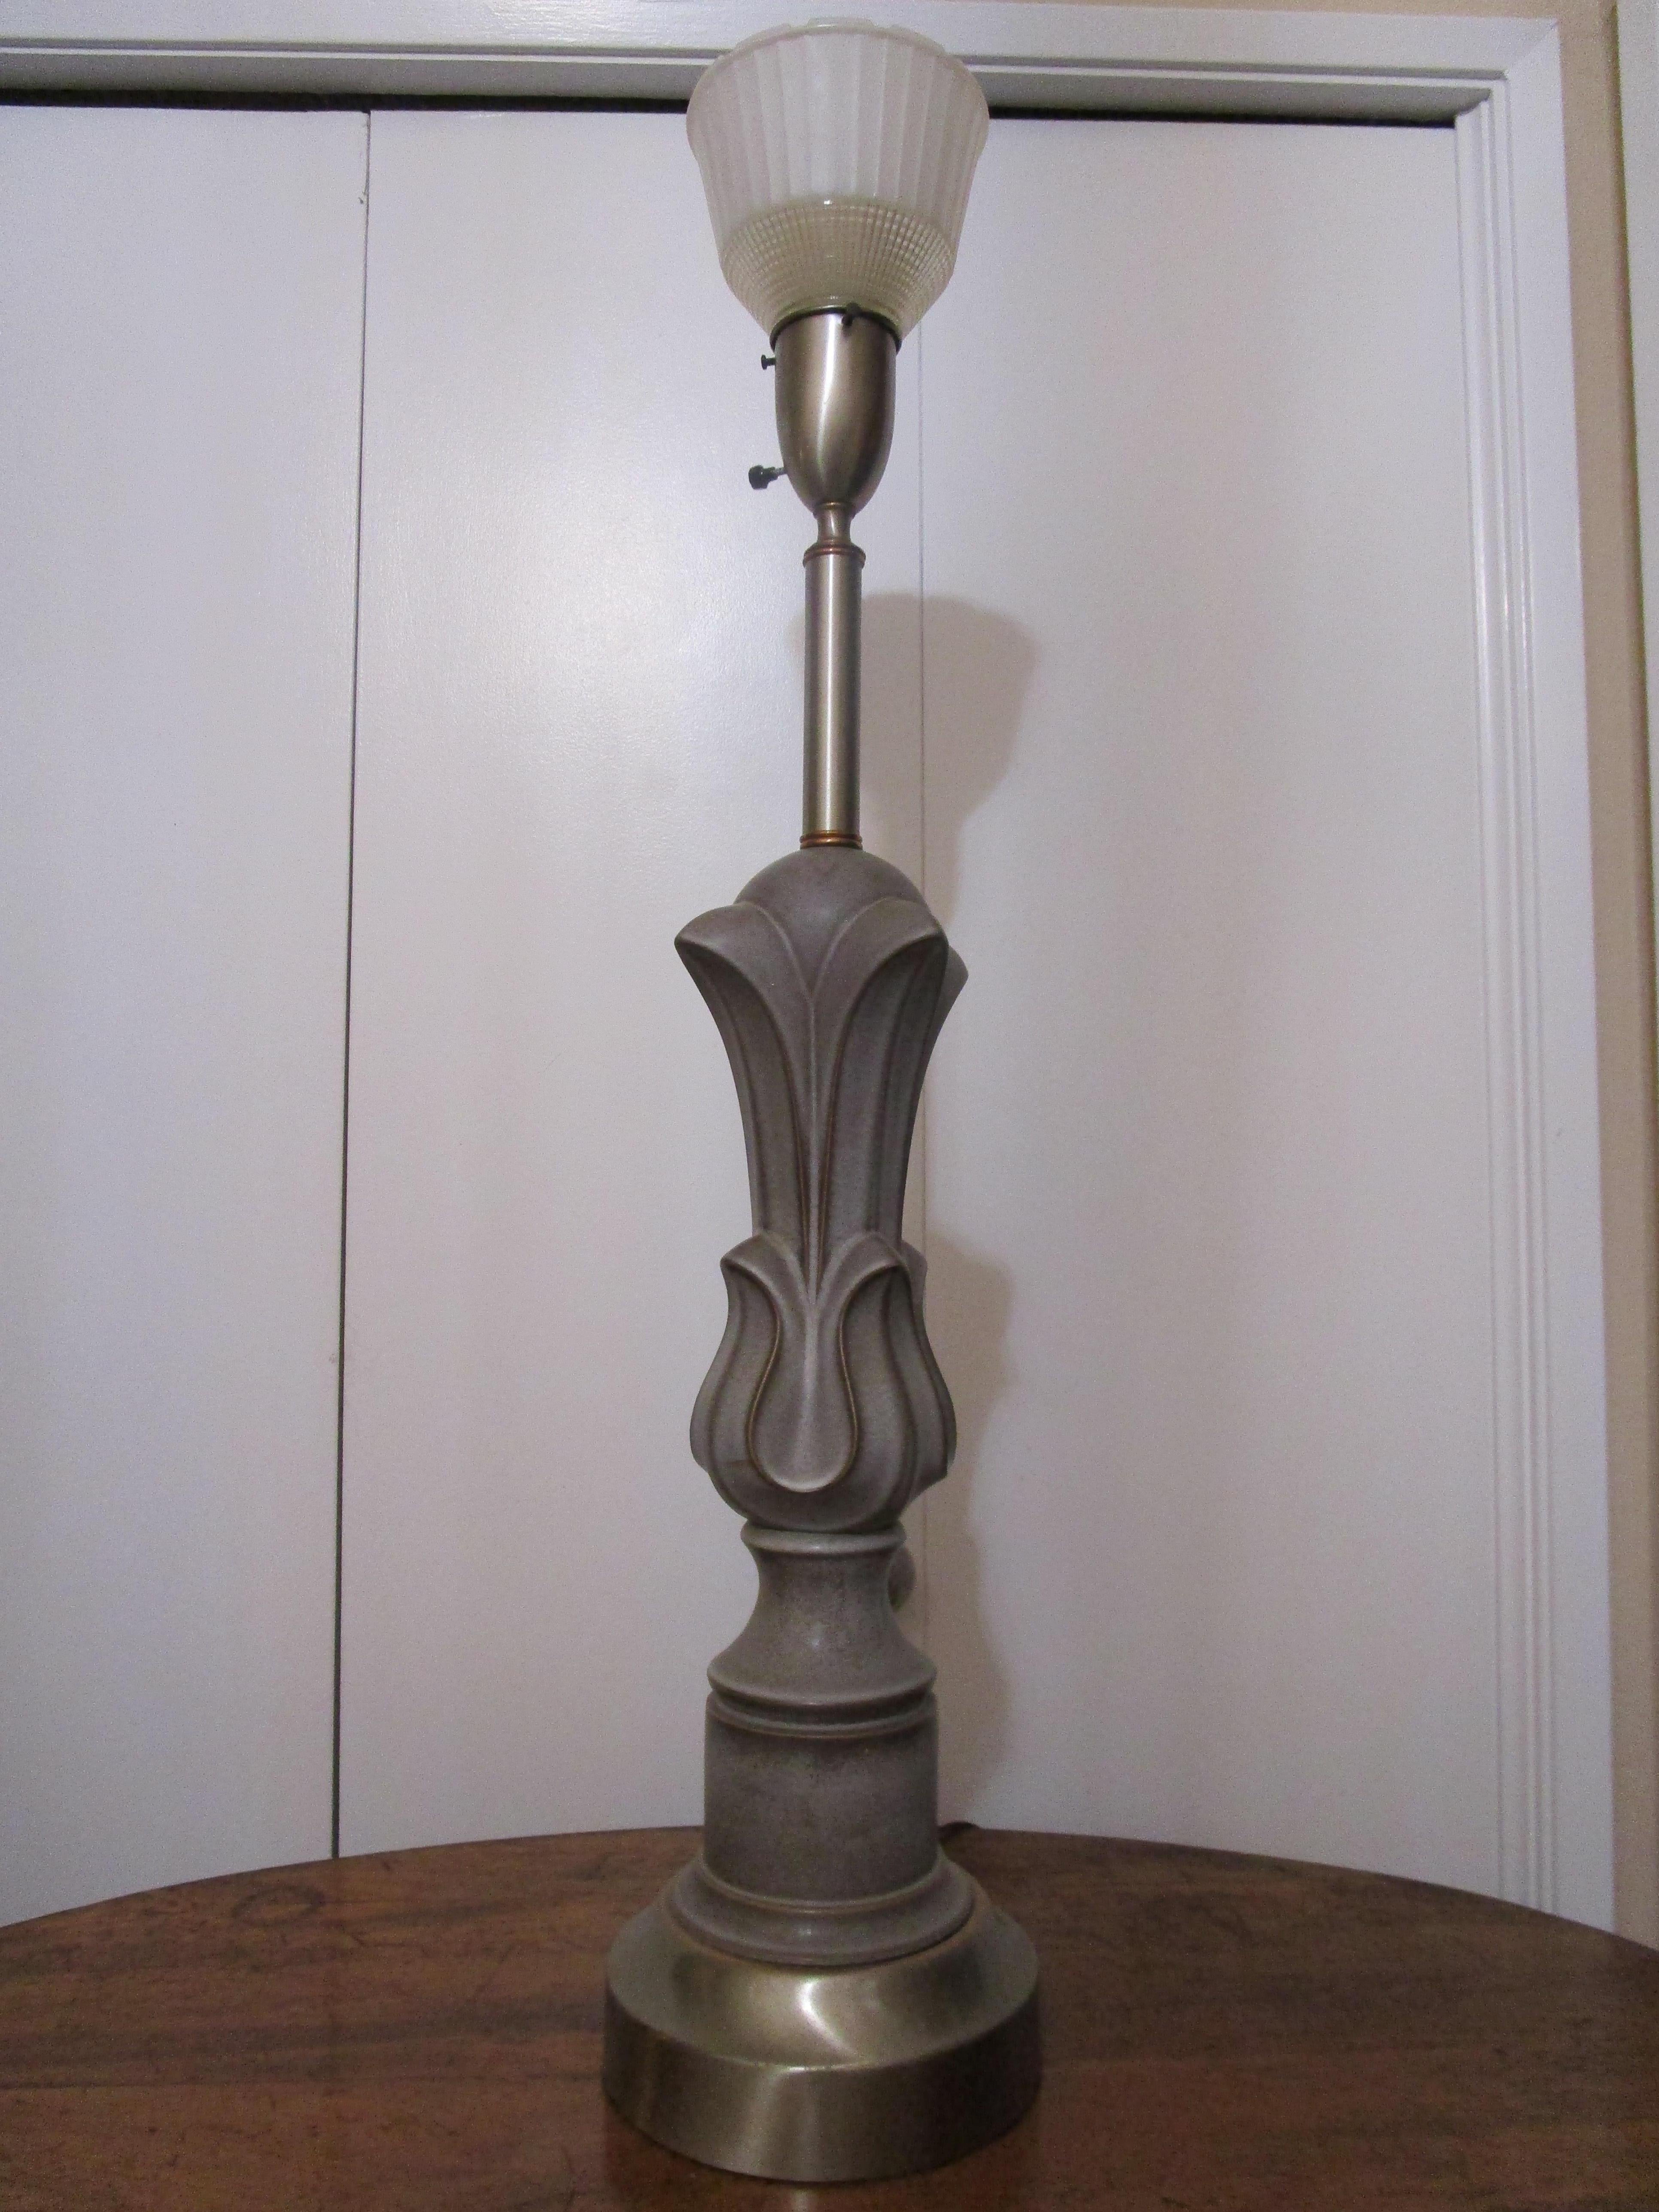 The art deco flair and materials, iron, copper and metal make this a standout for lovers of the design. Unique. This lamp was produced at the end of the deco period and shows all of the hallmarks of art deco. This is a unique standalone lamp that is